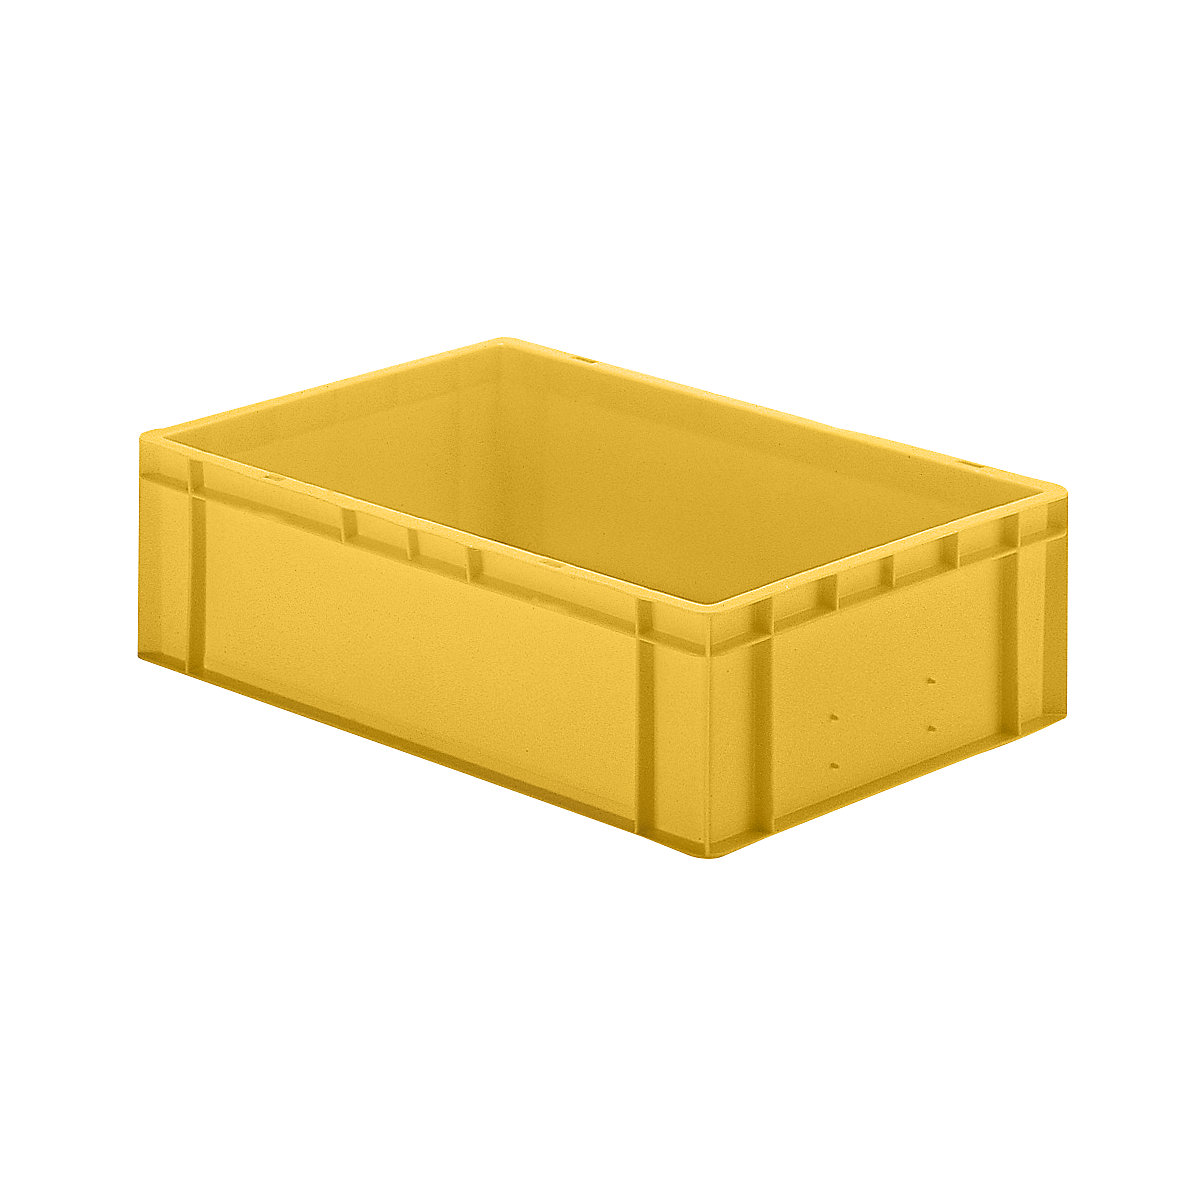 Euro stacking container, closed walls and base, LxWxH 600 x 400 x 175 mm, yellow, pack of 5